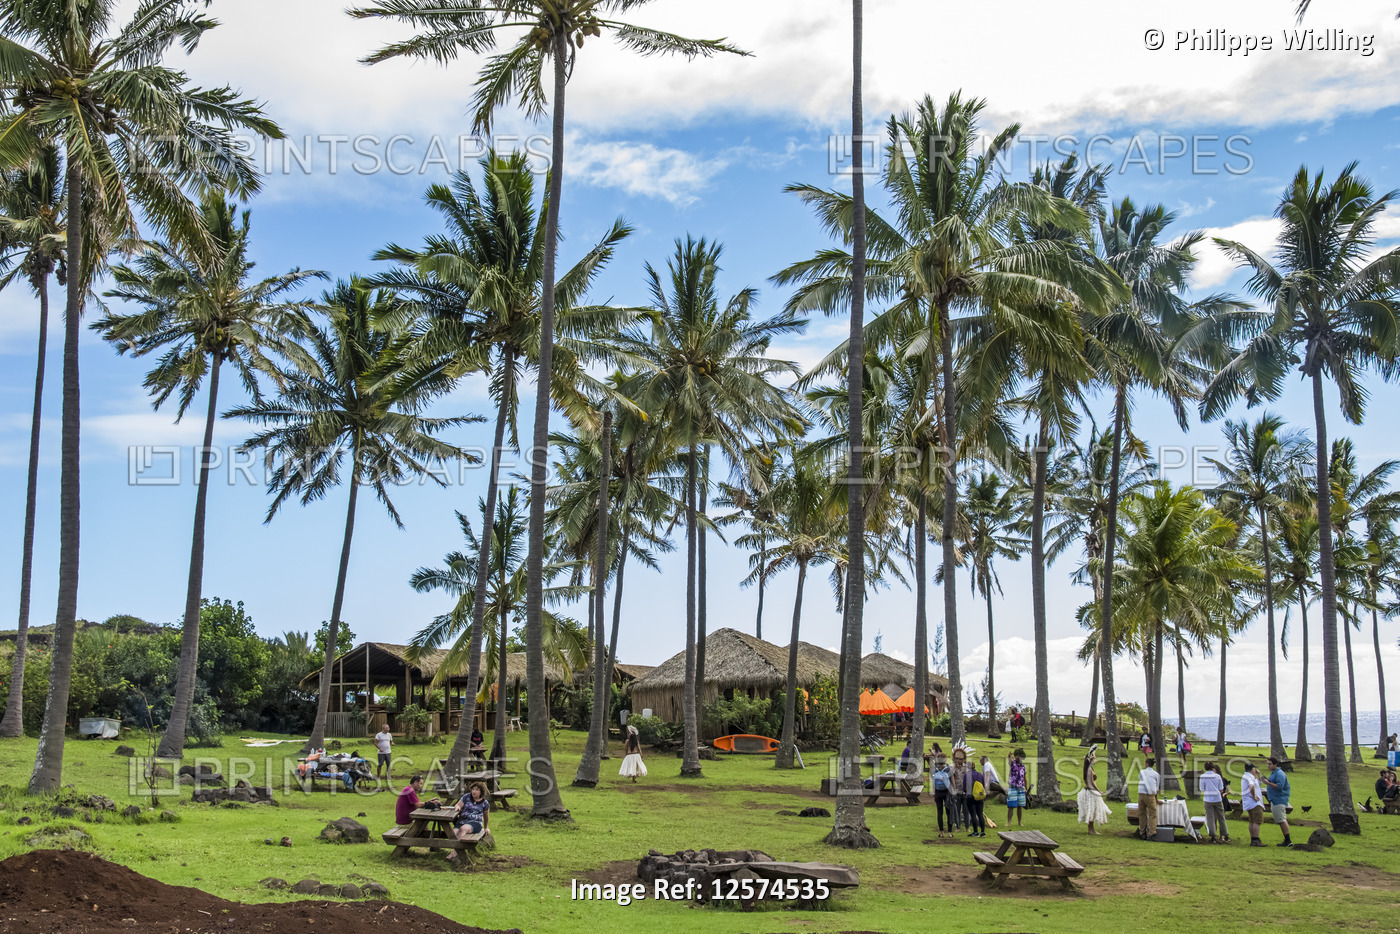 Large grassy park under palm trees with people at picnic tables; Easter Island, ...